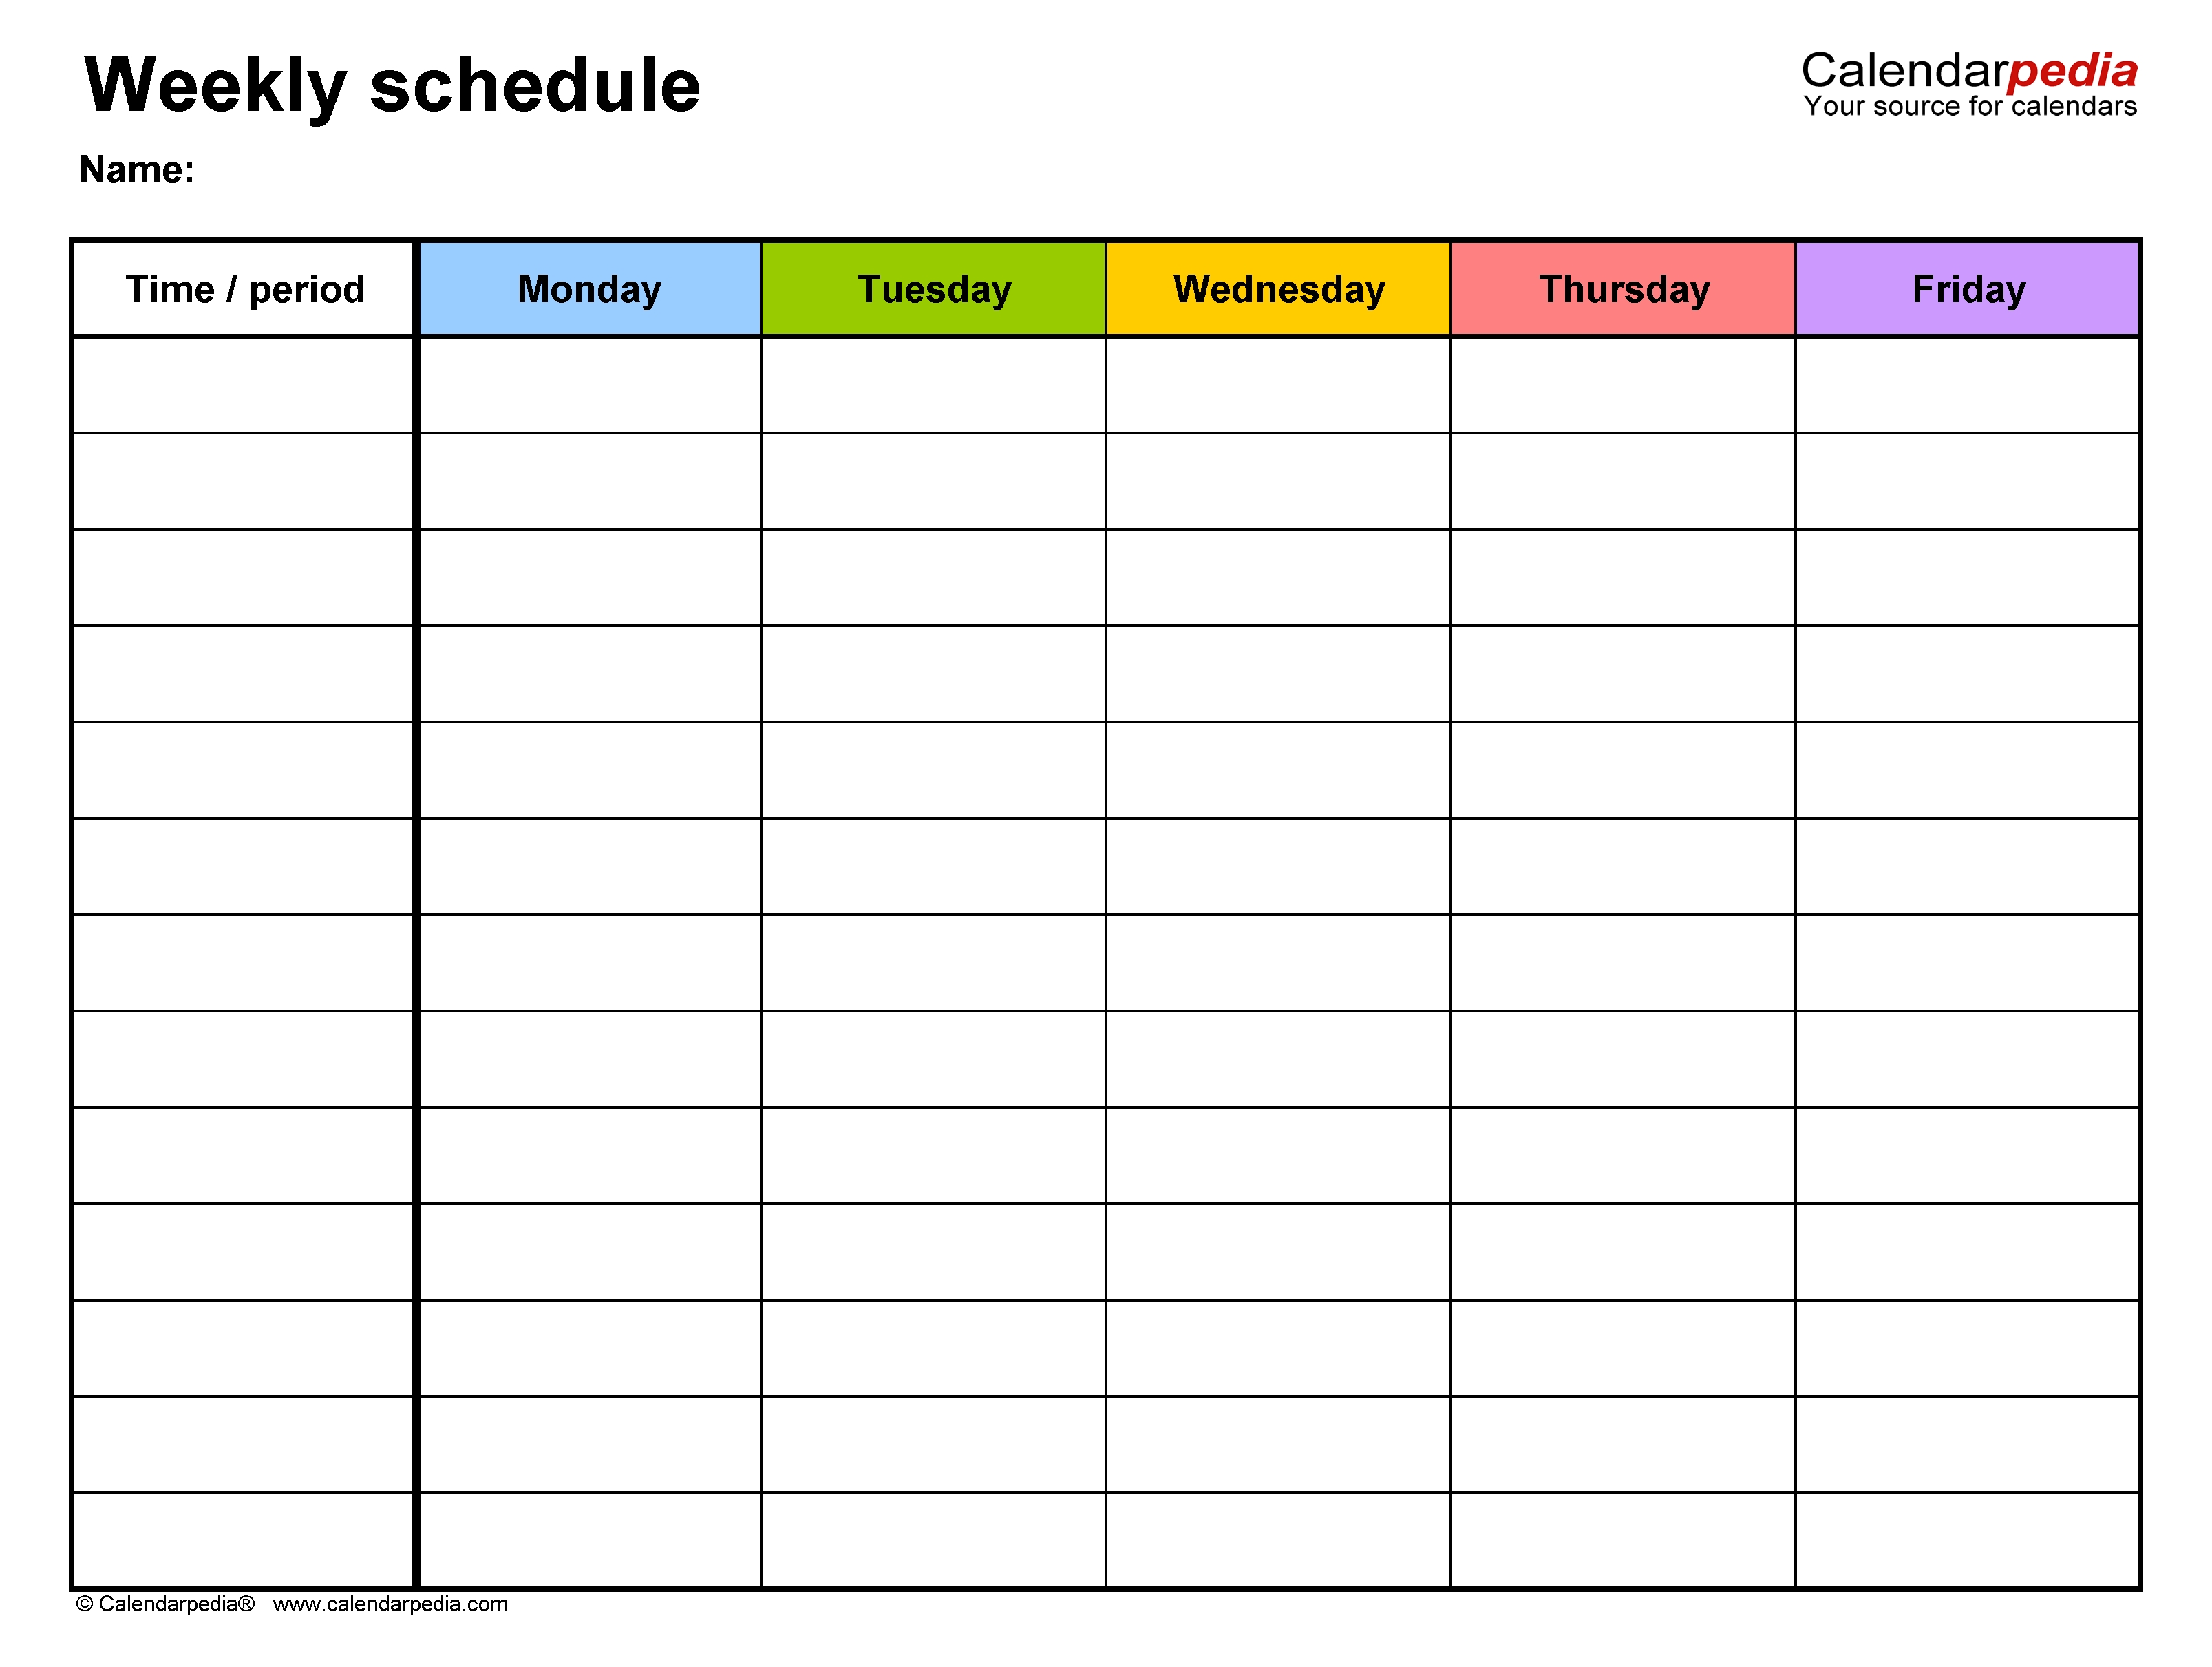 Free Weekly Schedule Templates For Word - 18 Templates-5 Day Week Calender Template